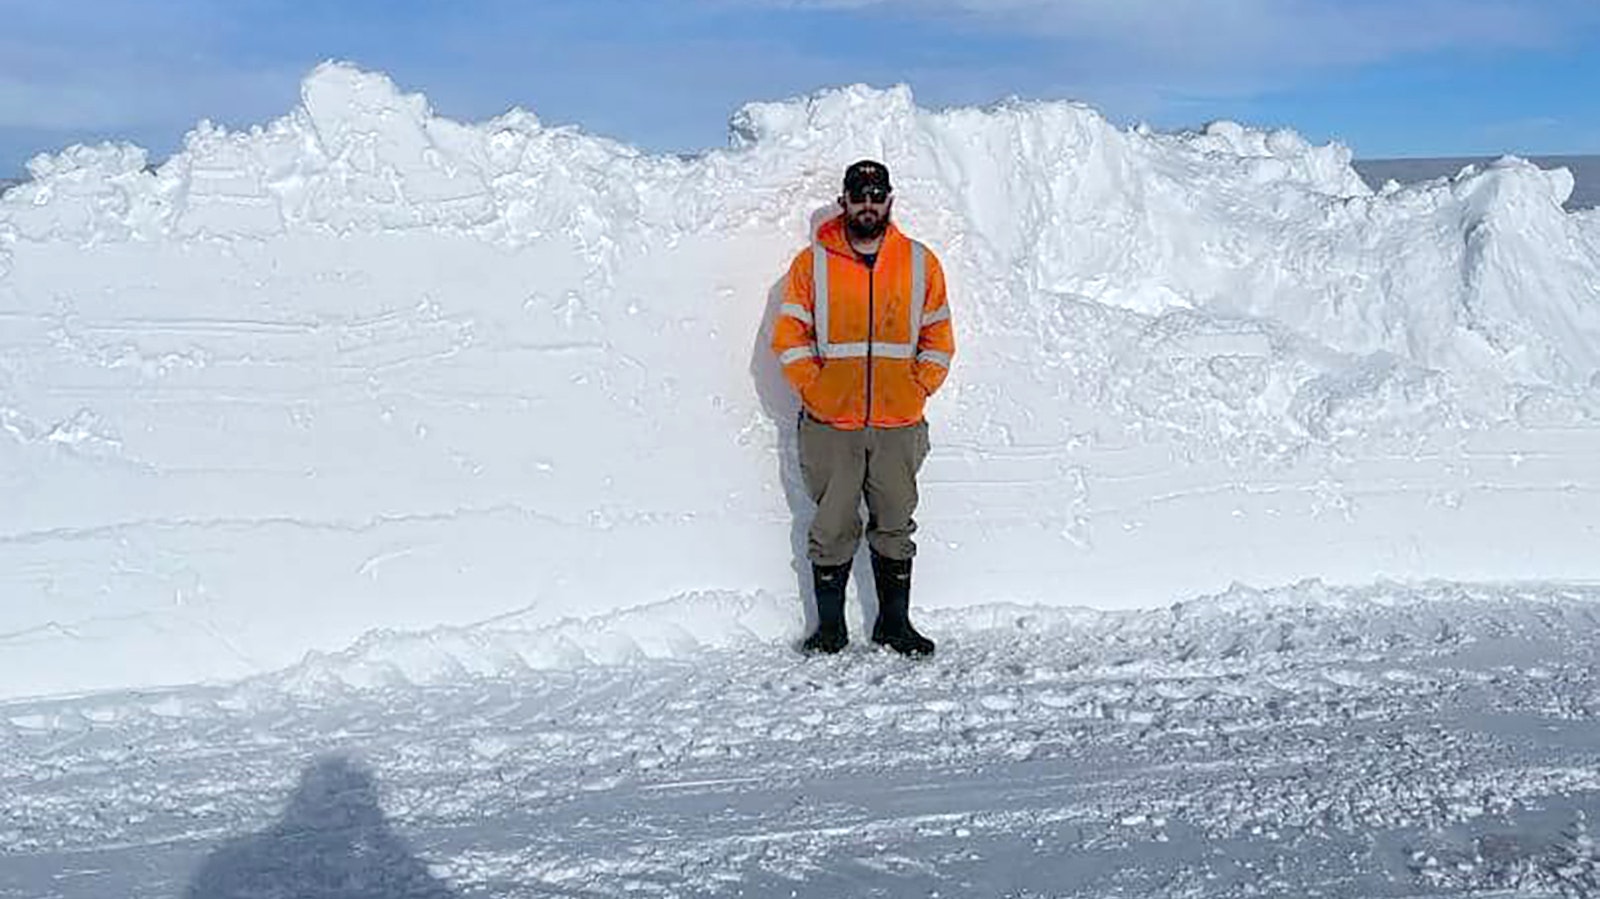 A Wyoming Department of Transportation worker stands next to a plowed road near Riverton, Wyoming, to show how much show had fallen during a storm this past winter. As the agency says on its Facebook page, the worker is not a short person.